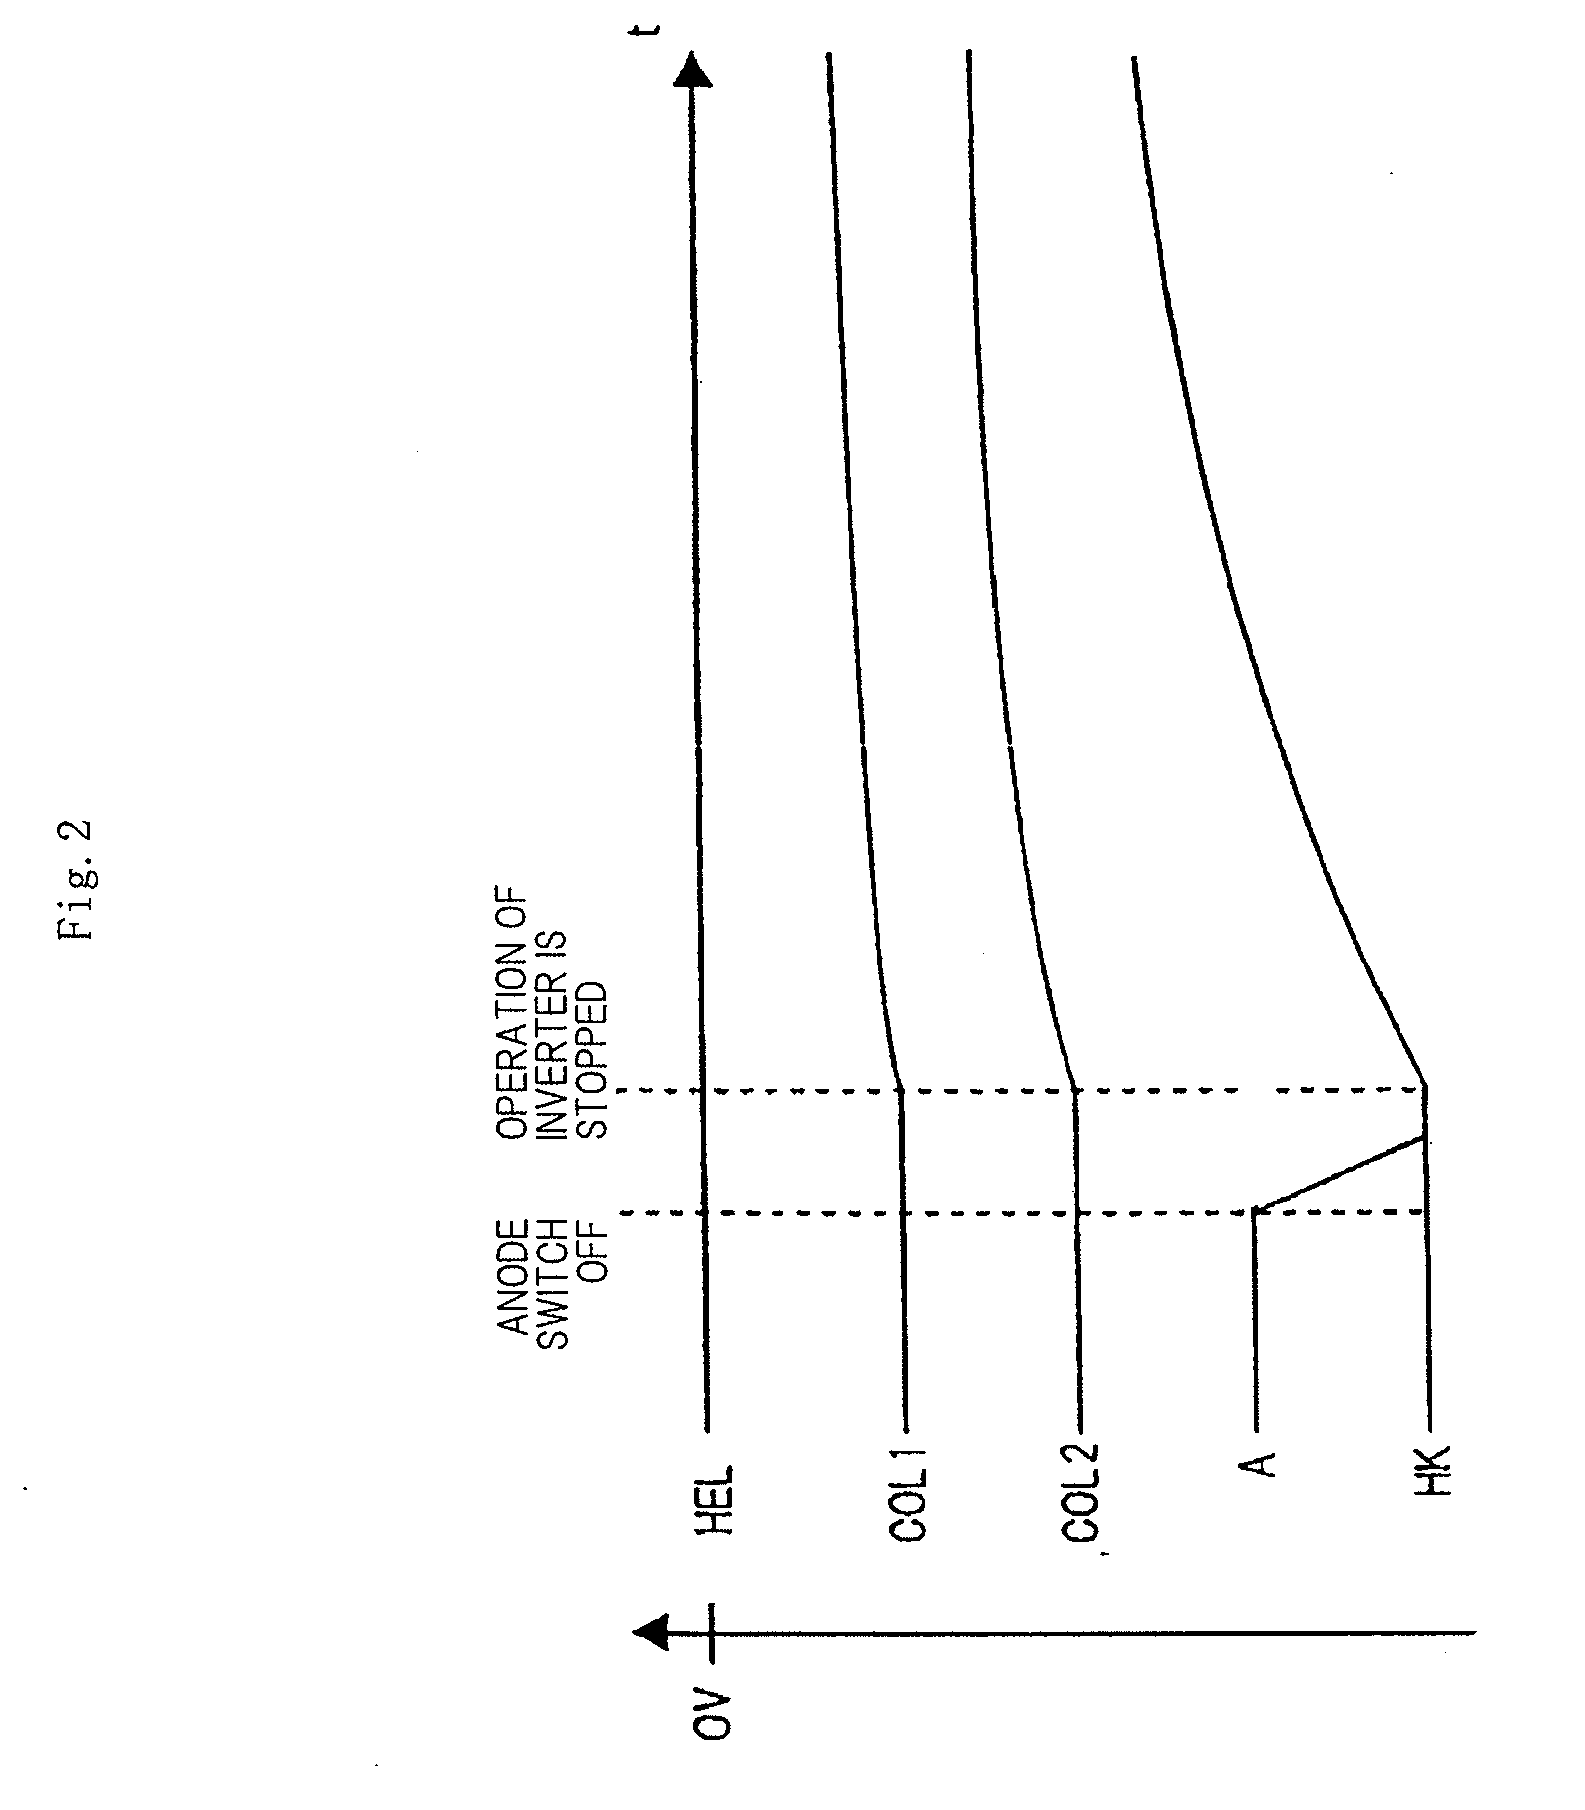 Power supply apparatus and high-frequency circuit system